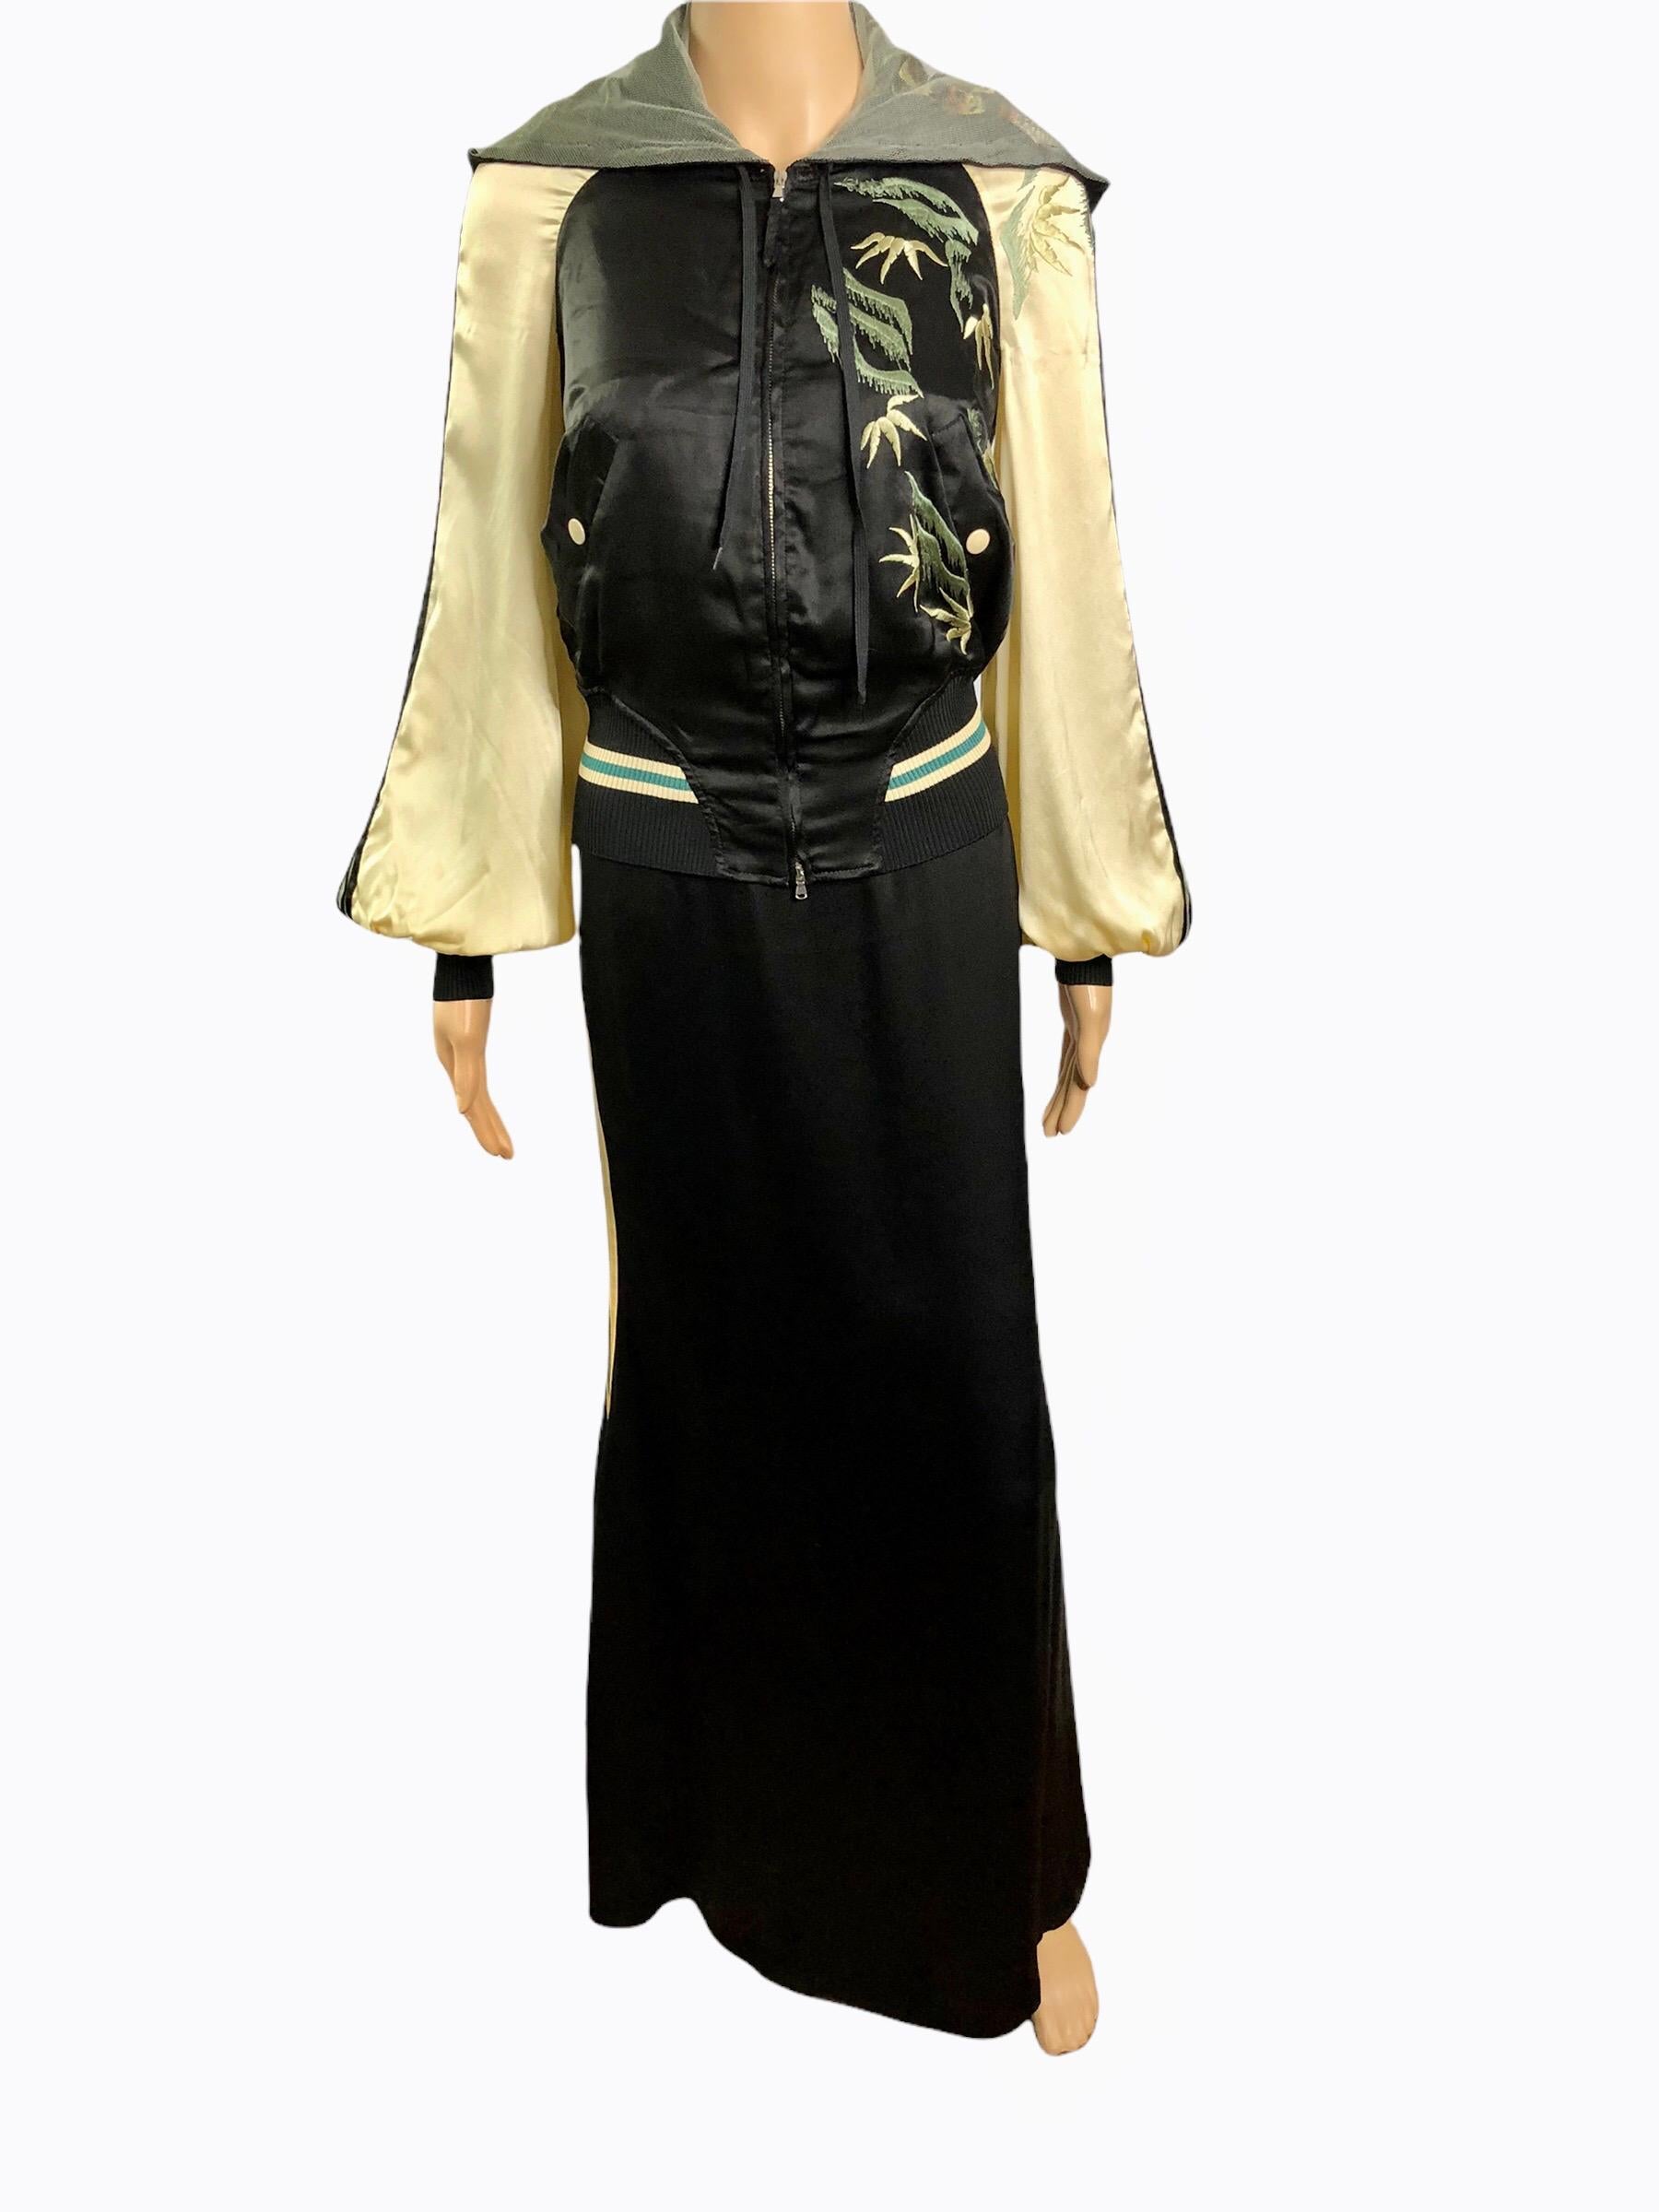 Jean Paul Gaultier S/S 2007 Runway Embroidered Silk Dress & Jacket 2 Piece Set  In Good Condition For Sale In Naples, FL